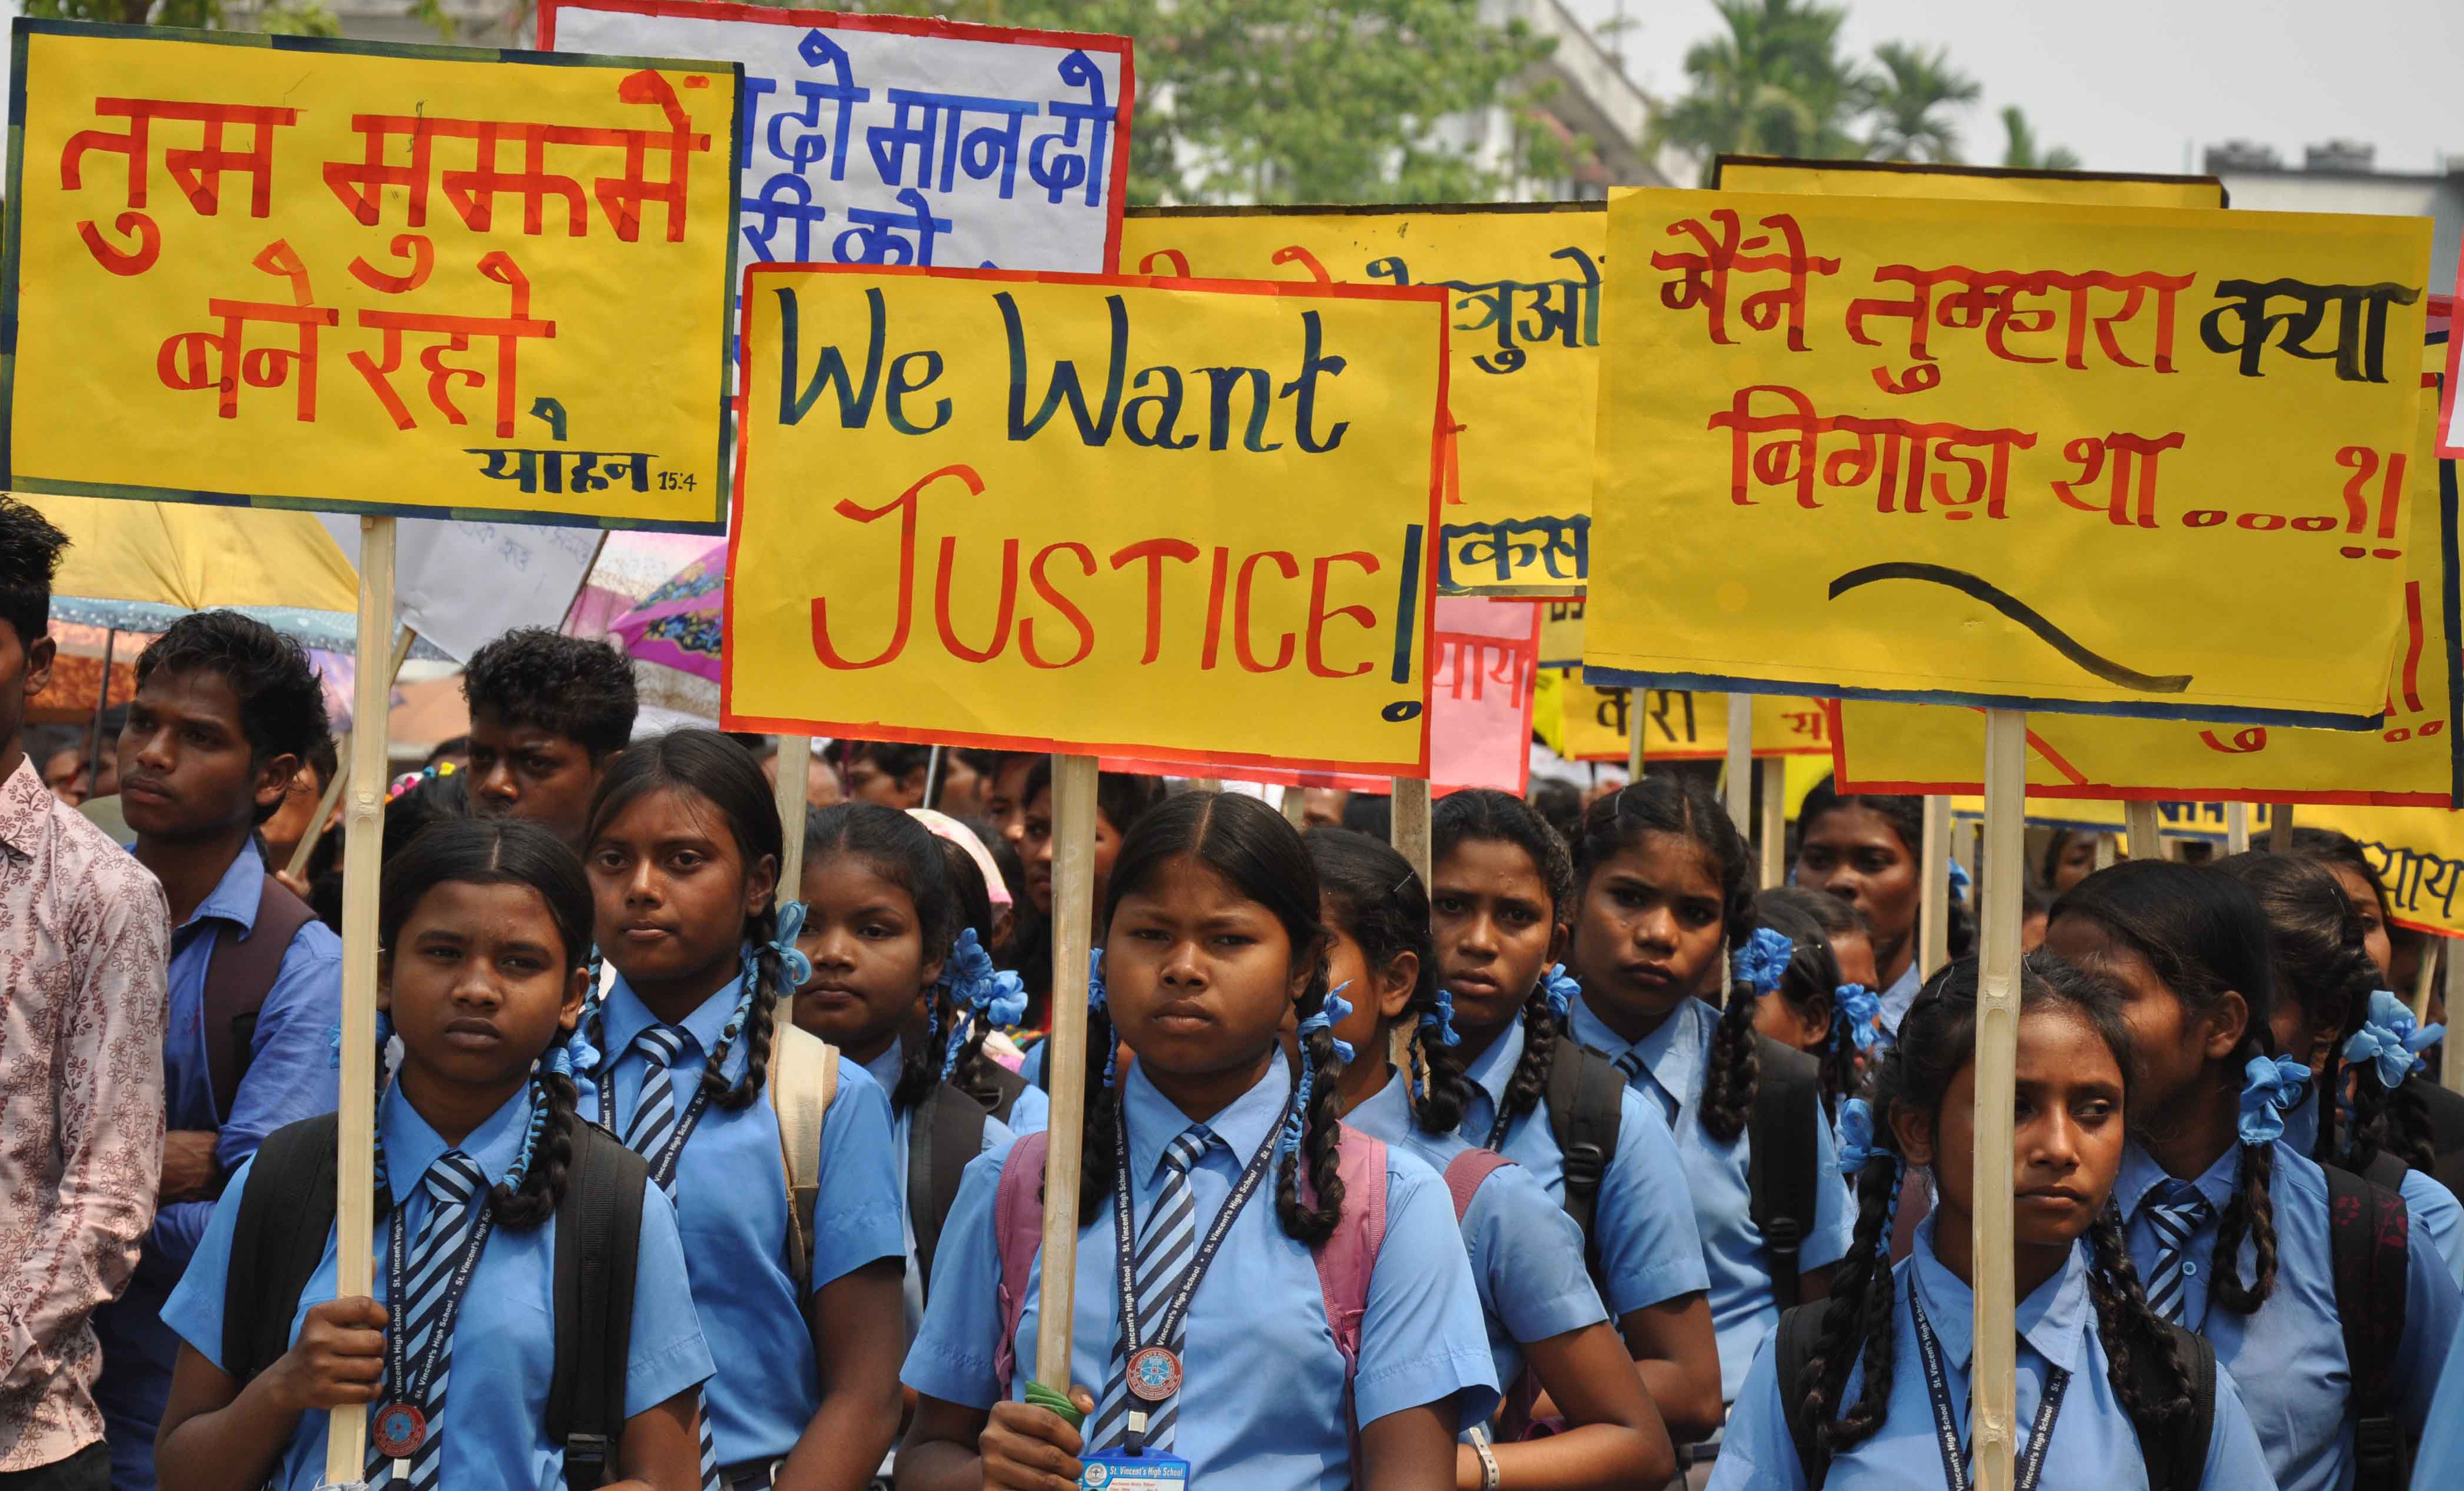 Indian Christian residents of Siliguri protest against the gang rape of a nun in Siliguri, West Bengal India, on March 23, 2015. (S Majumder—NurPhoto/Getty Images)